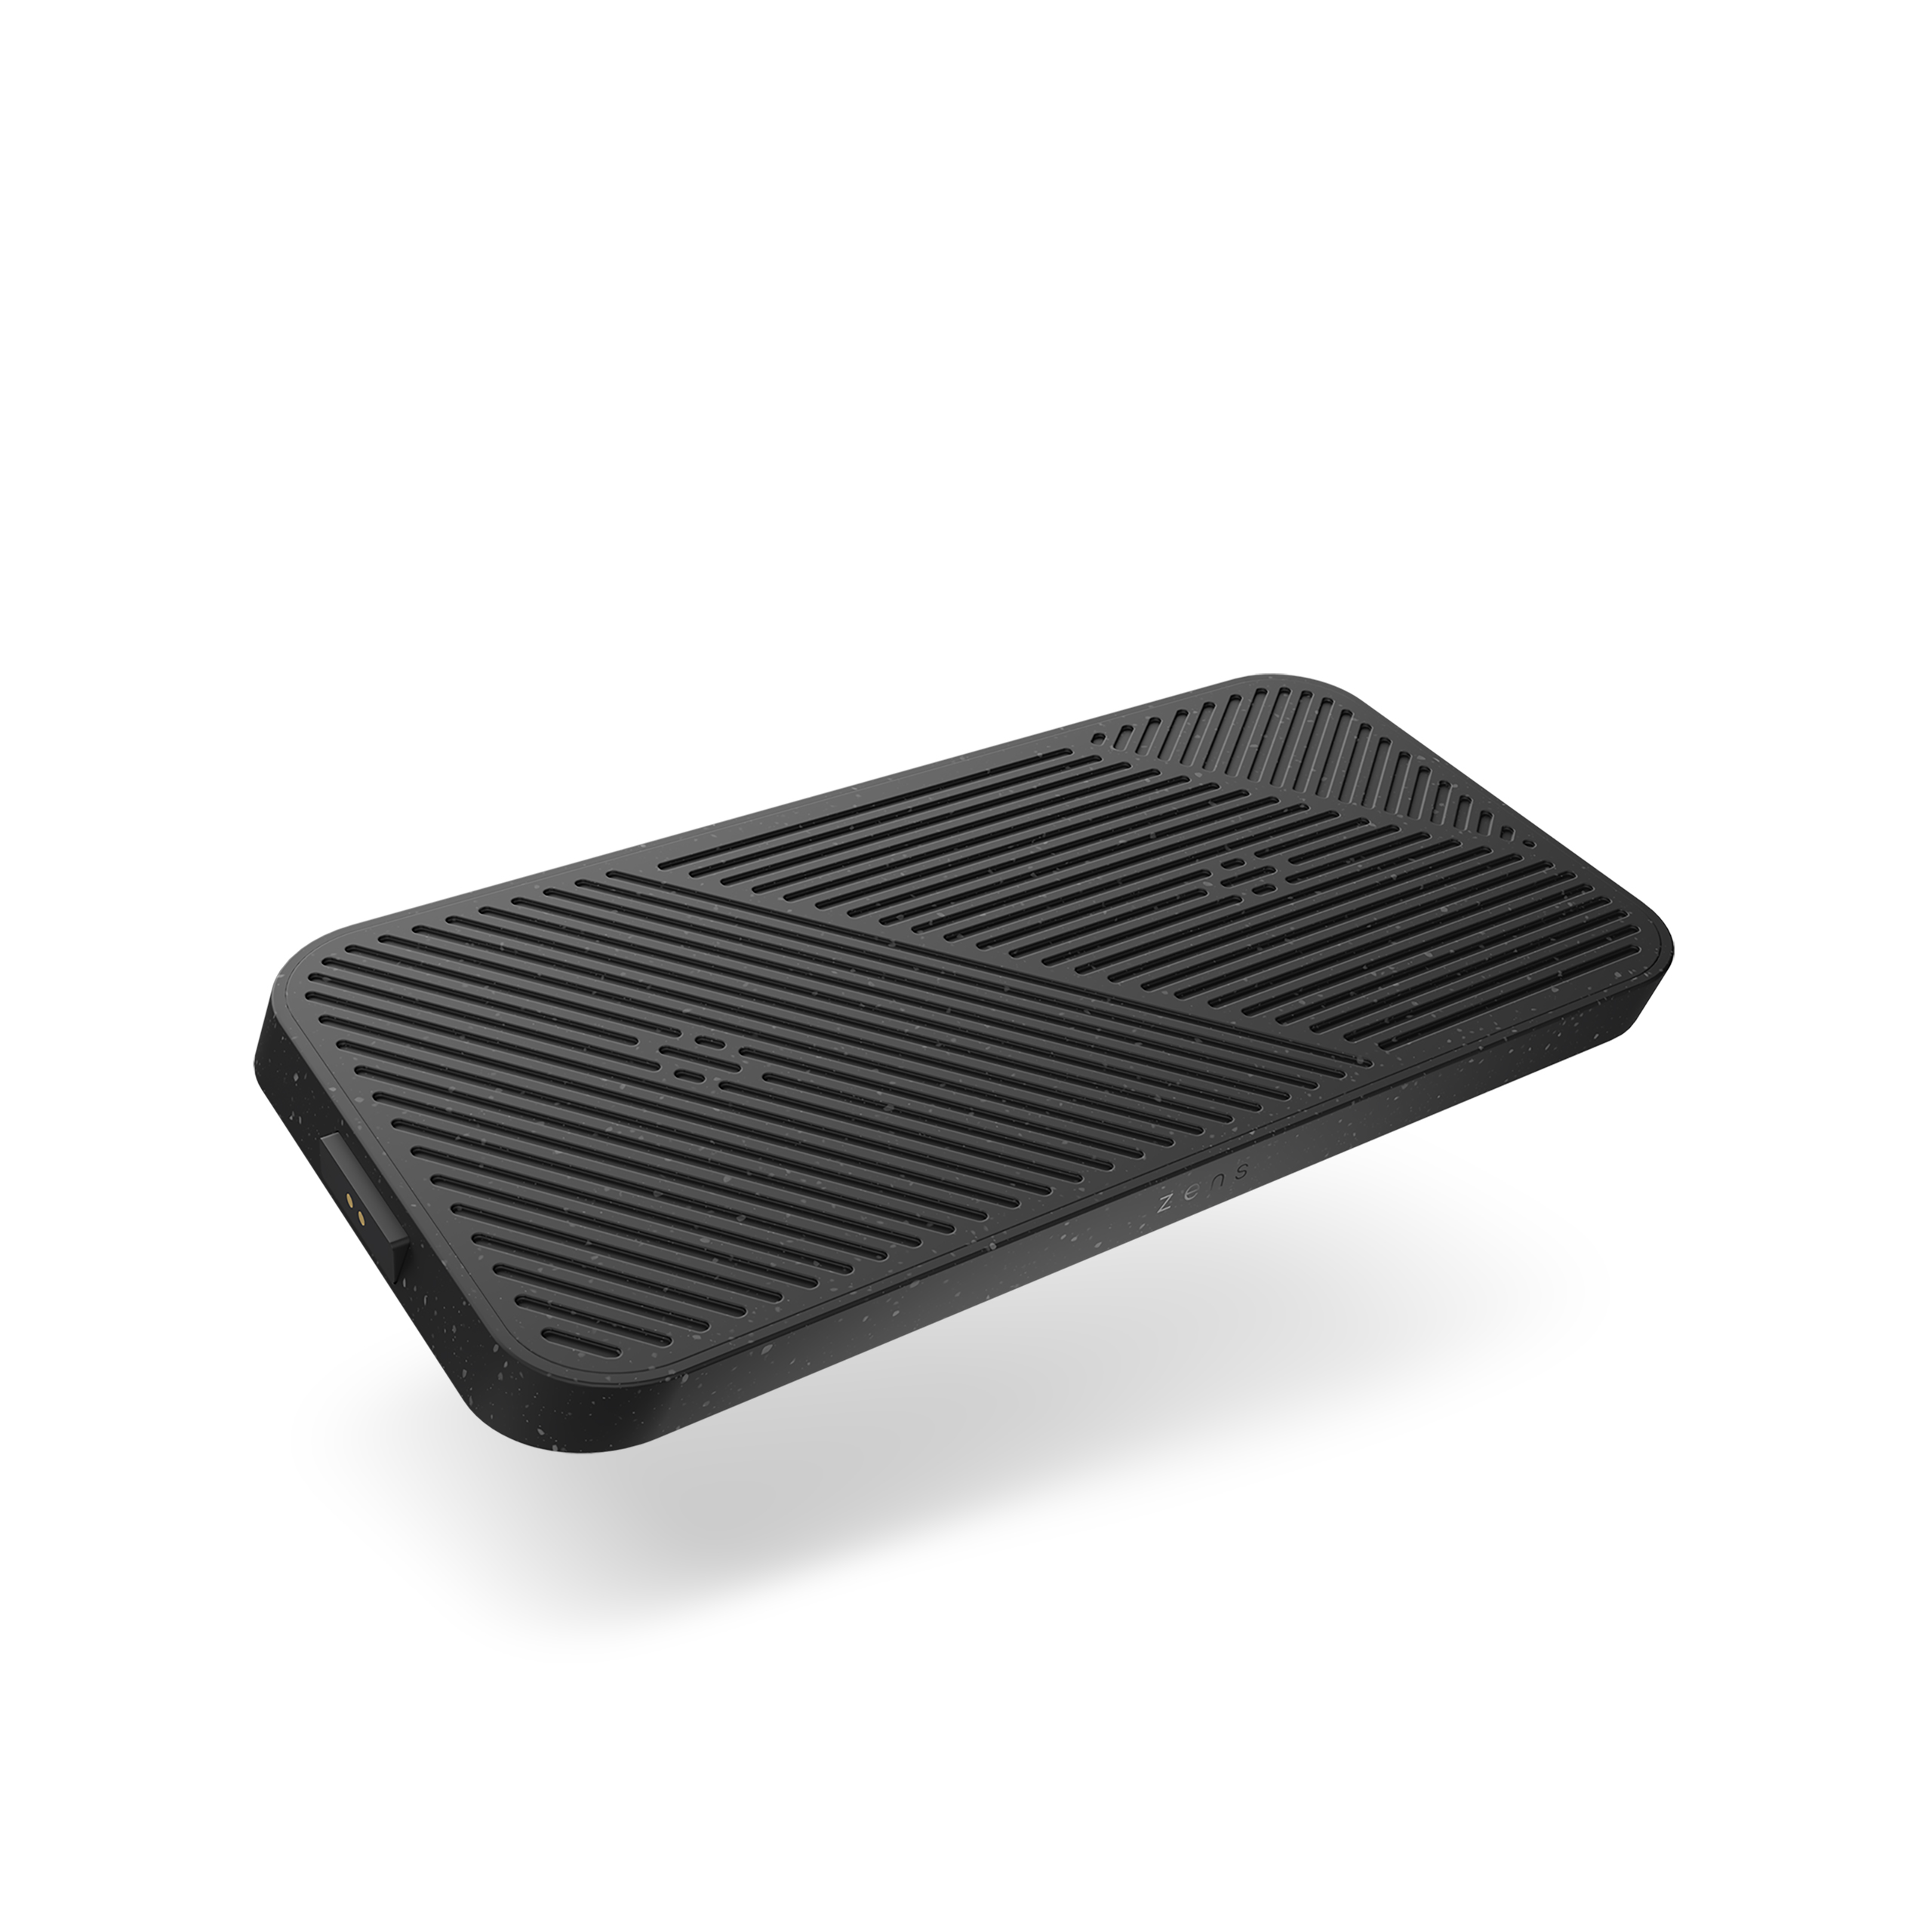 ZEMDC01P Zens Modular Dual Wireless Charger Main Station Front Side View